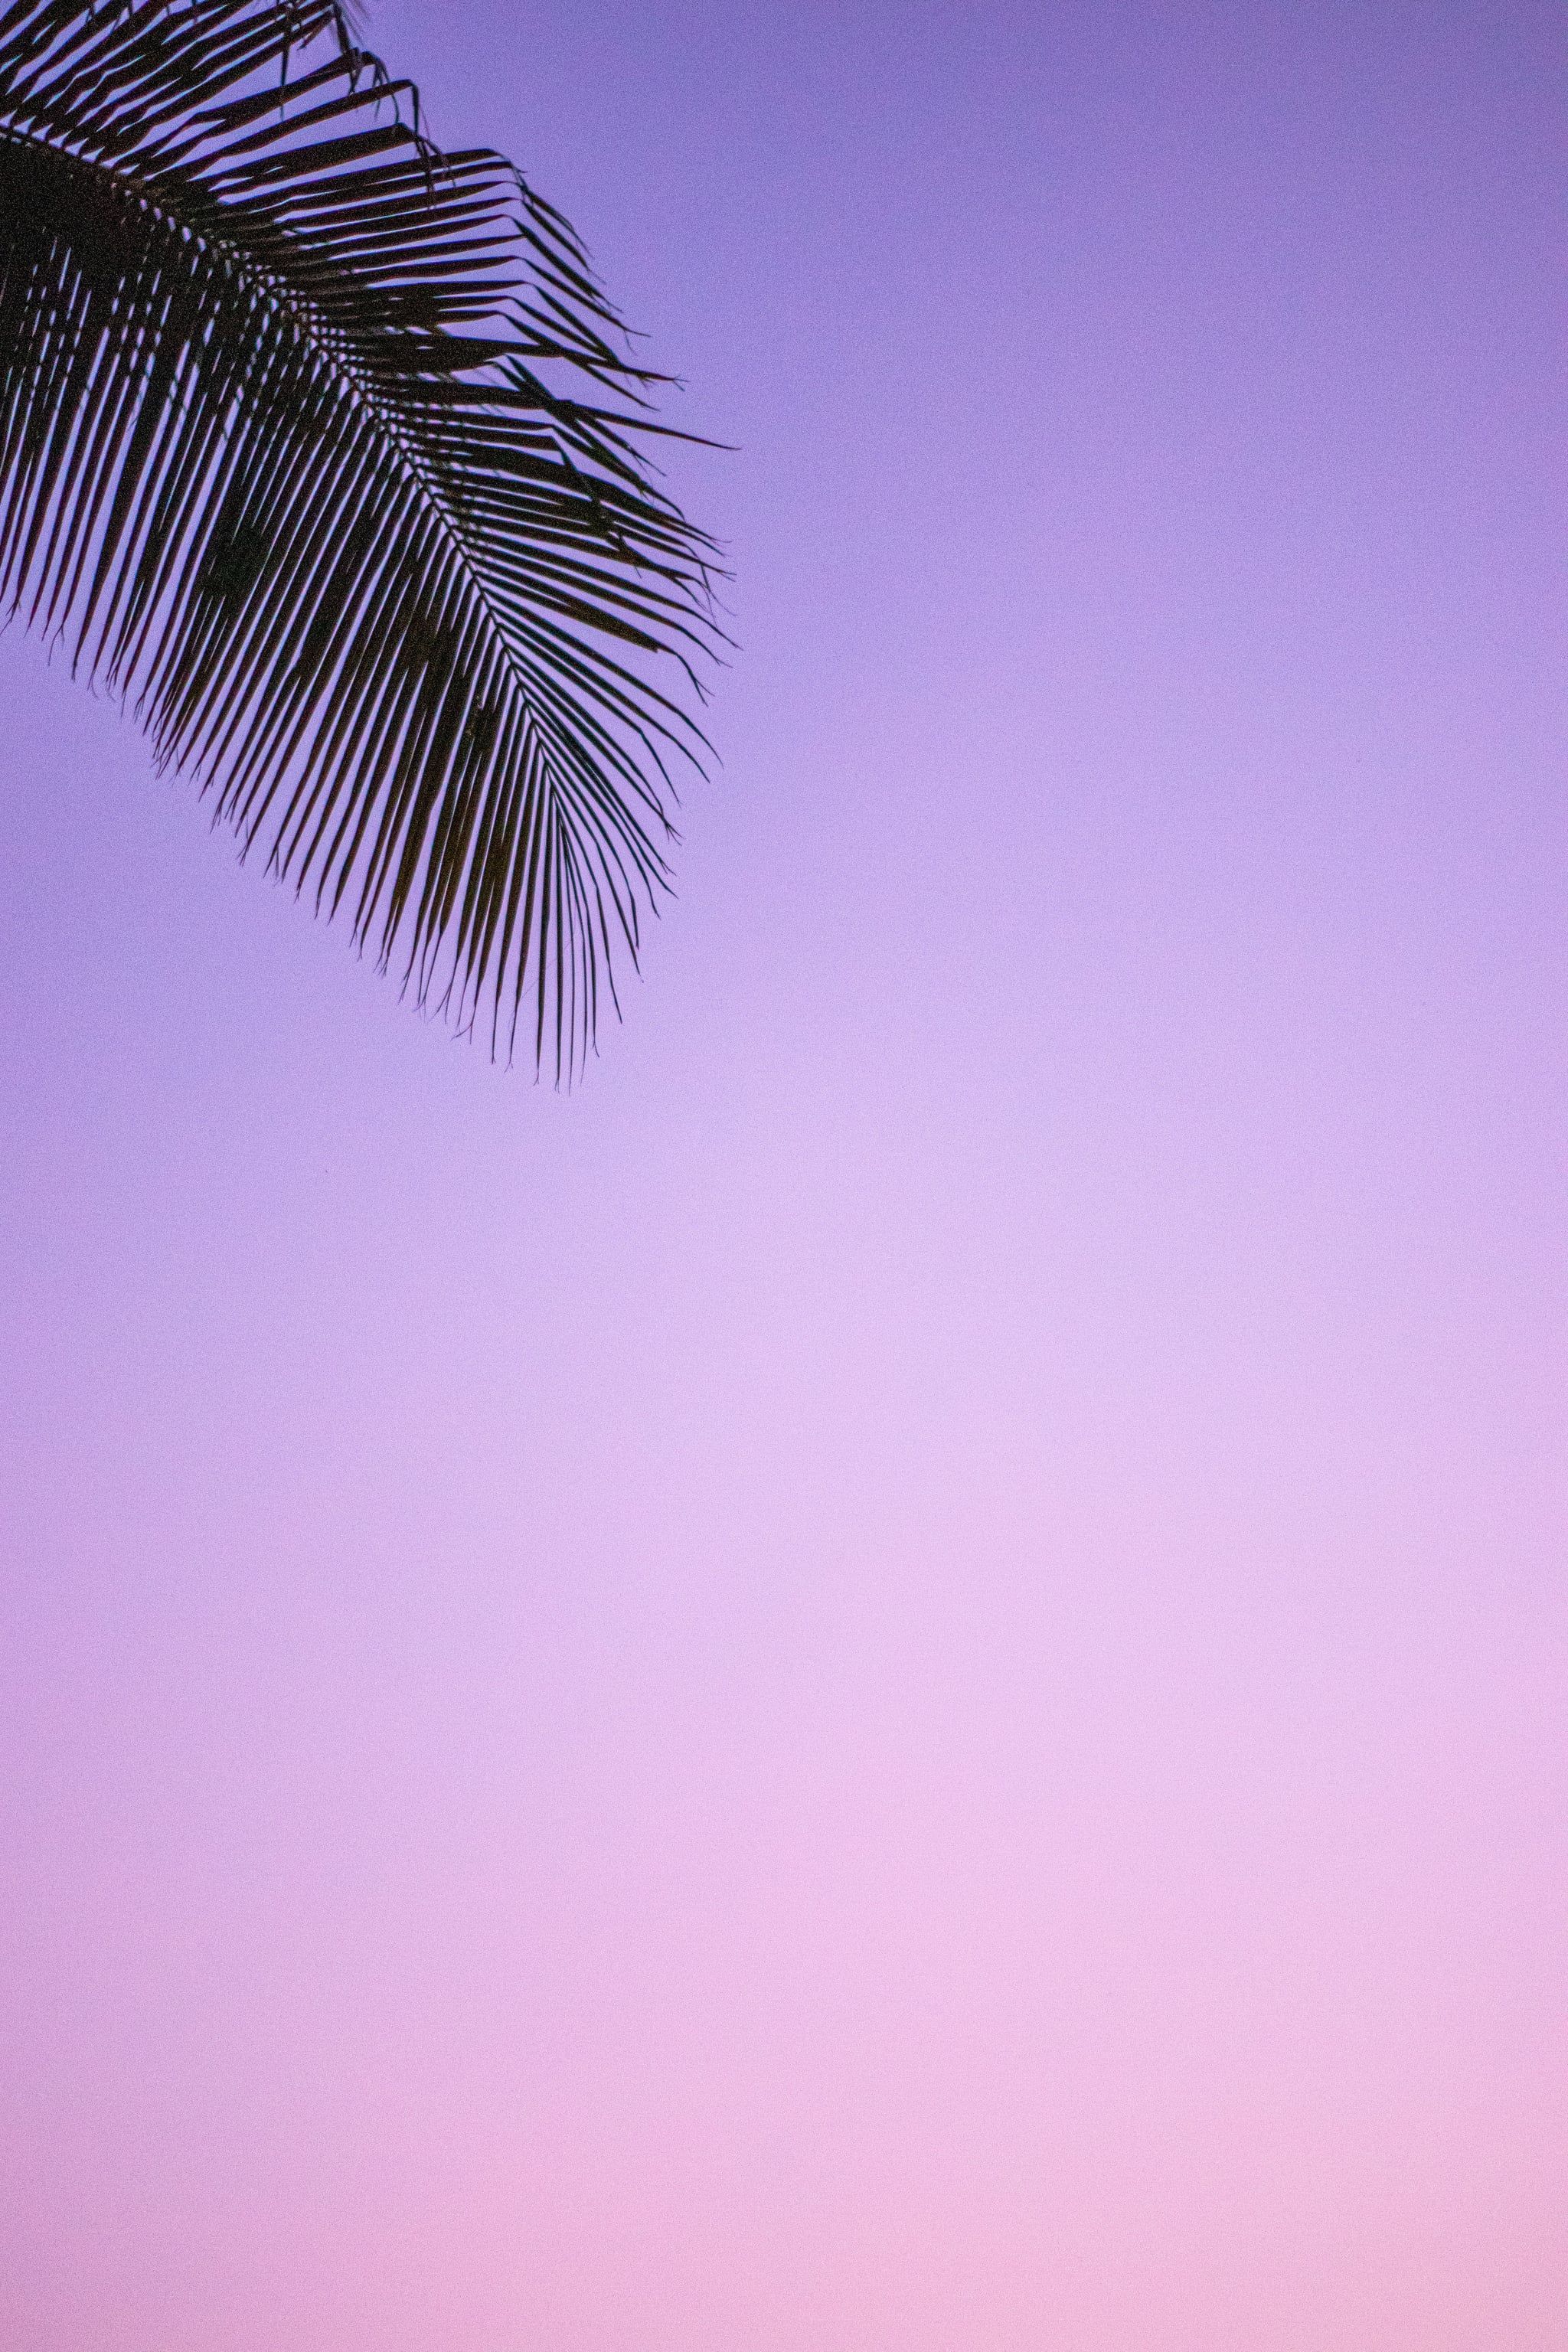 Tropical iPhone Wallpaper. The Best iOS 14 Wallpaper Ideas That'll Make Your Phone Look Aesthetically Pleasing AF